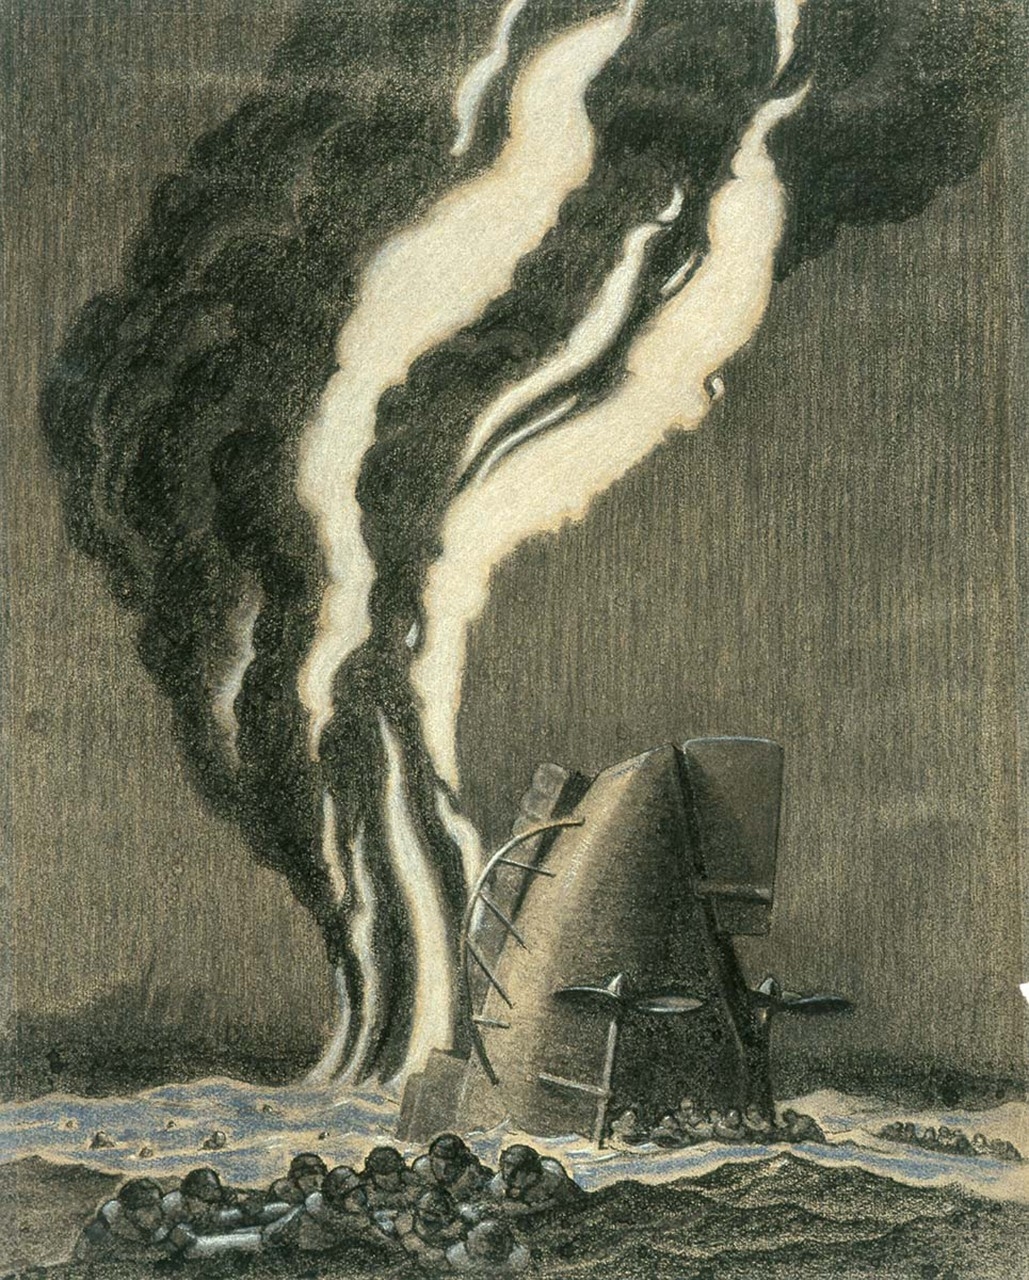 Drawing of the Sinking of Reuben James